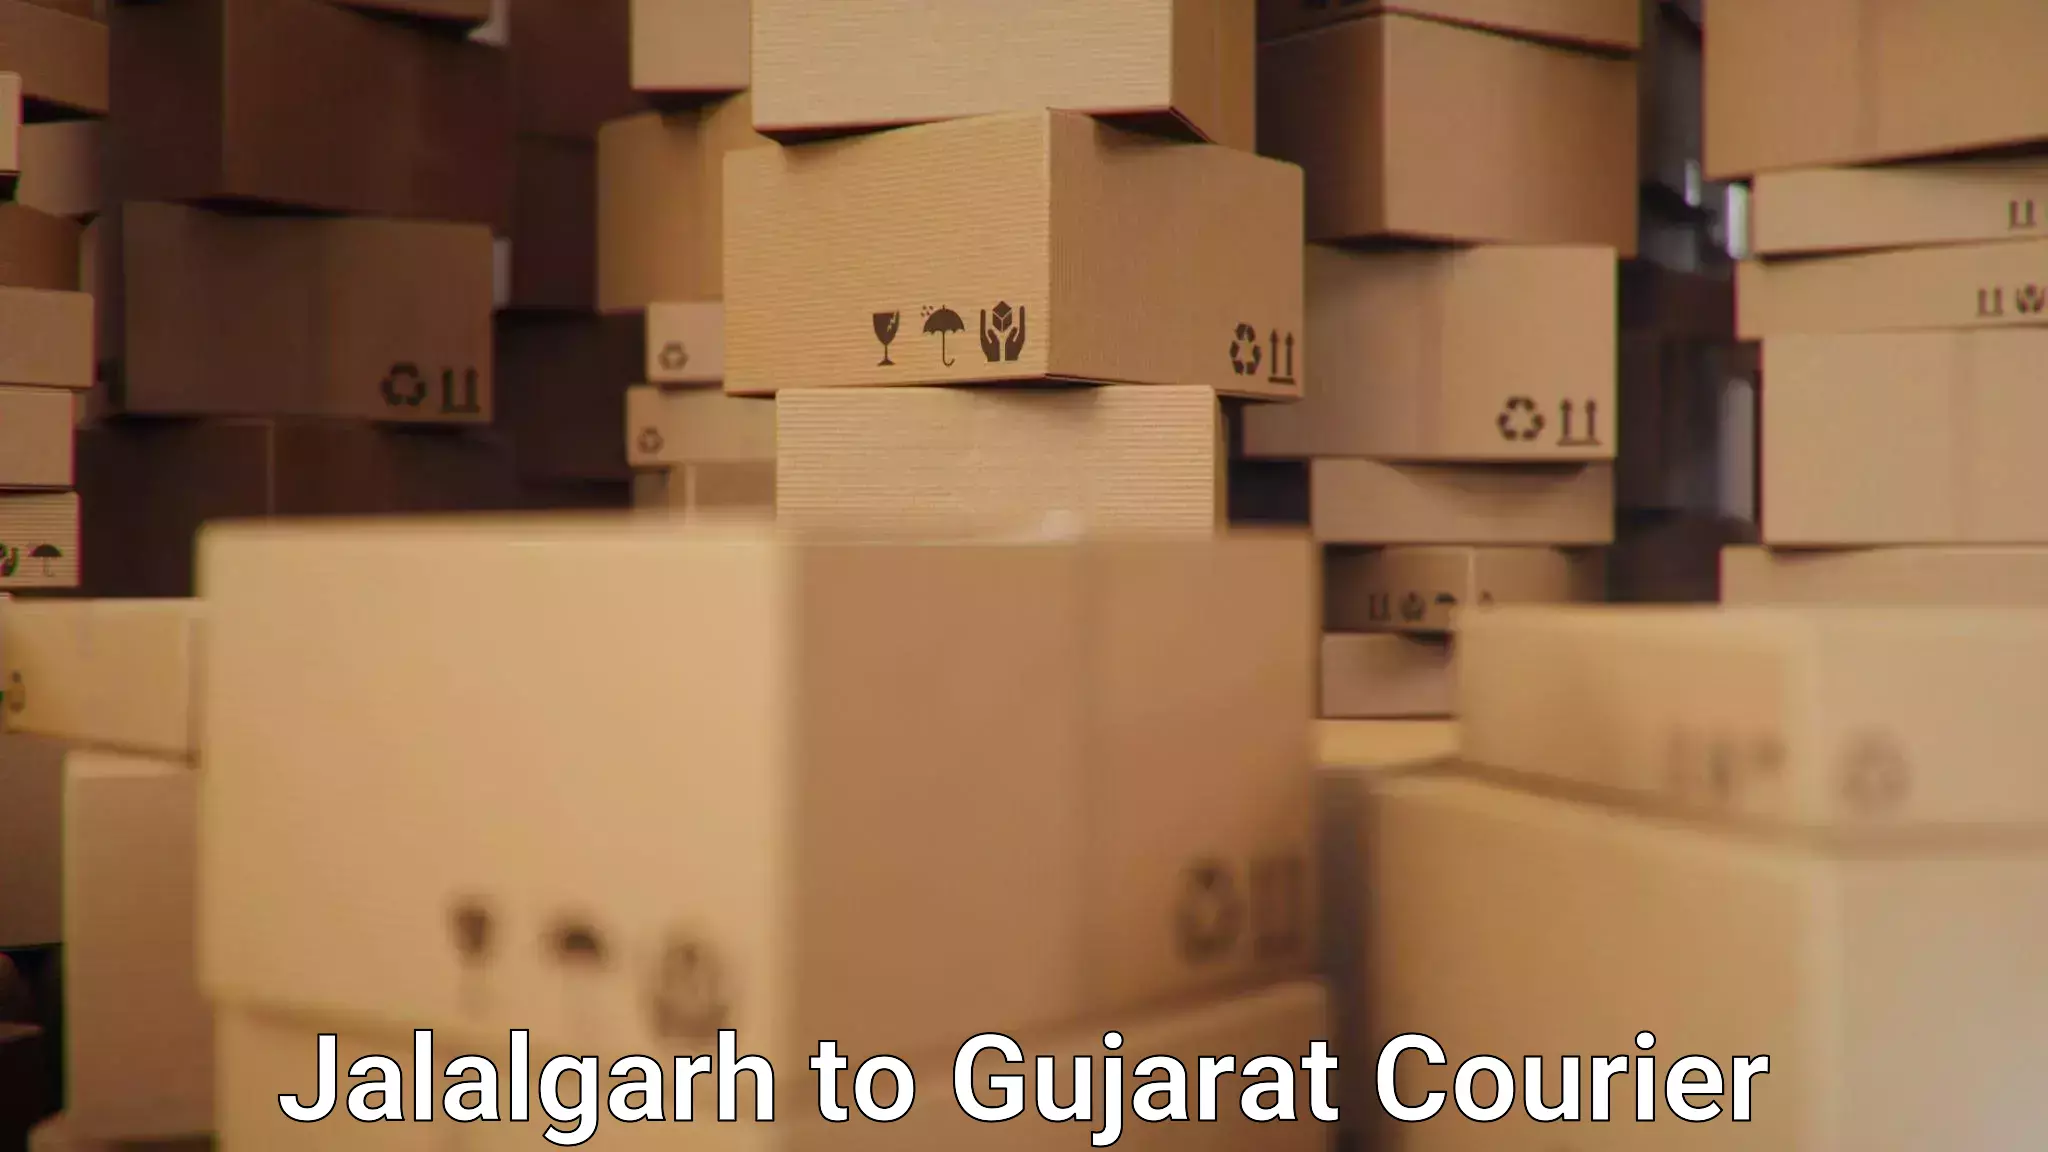 State-of-the-art courier technology Jalalgarh to Vagara